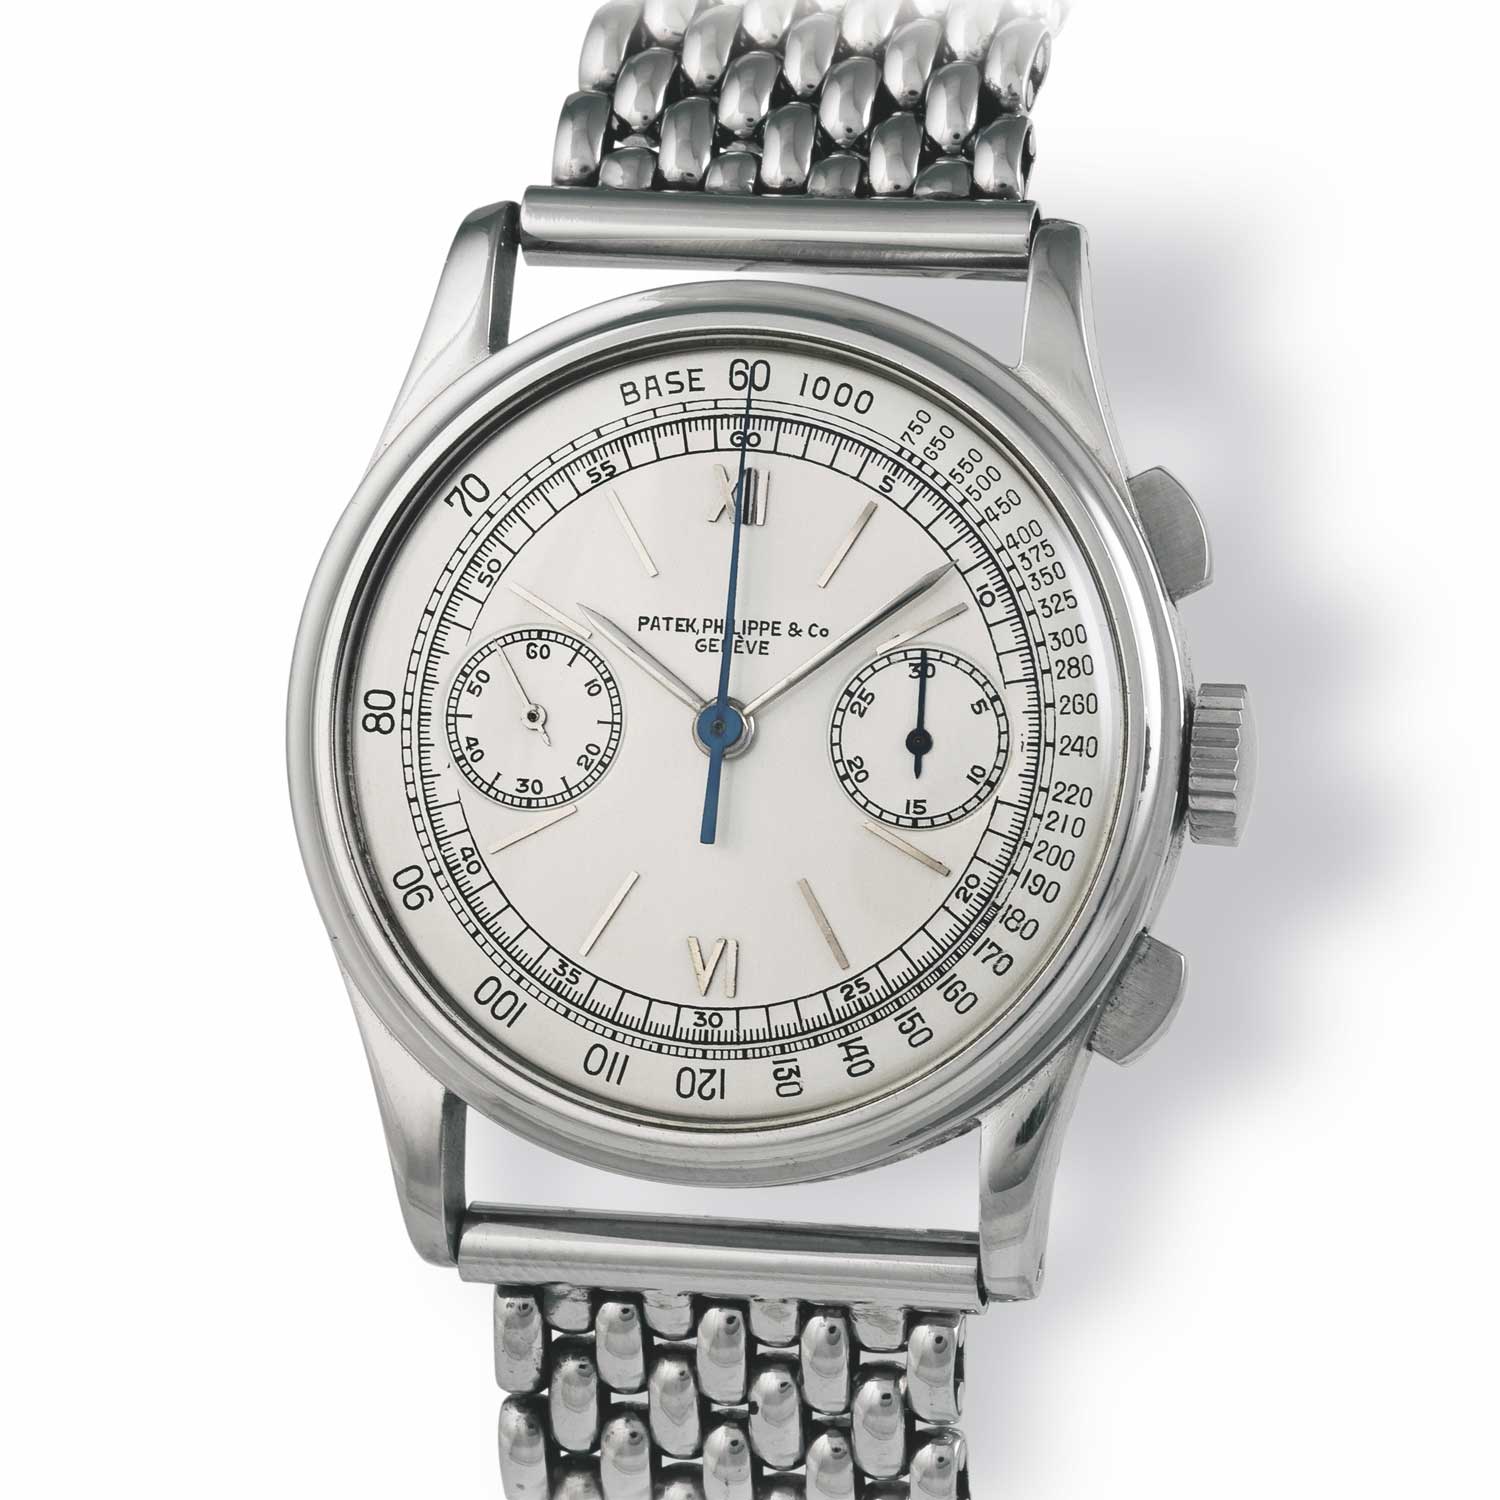 Patek Philippe ref. 530 steel chronograph with Roman numerals and baton markers, fitted on a steel “grains of rice” bracelet by Gay Frères, was sold Serpico y Laino in Caracas, Venezuela, in 1941 (Image: John Goldberger)